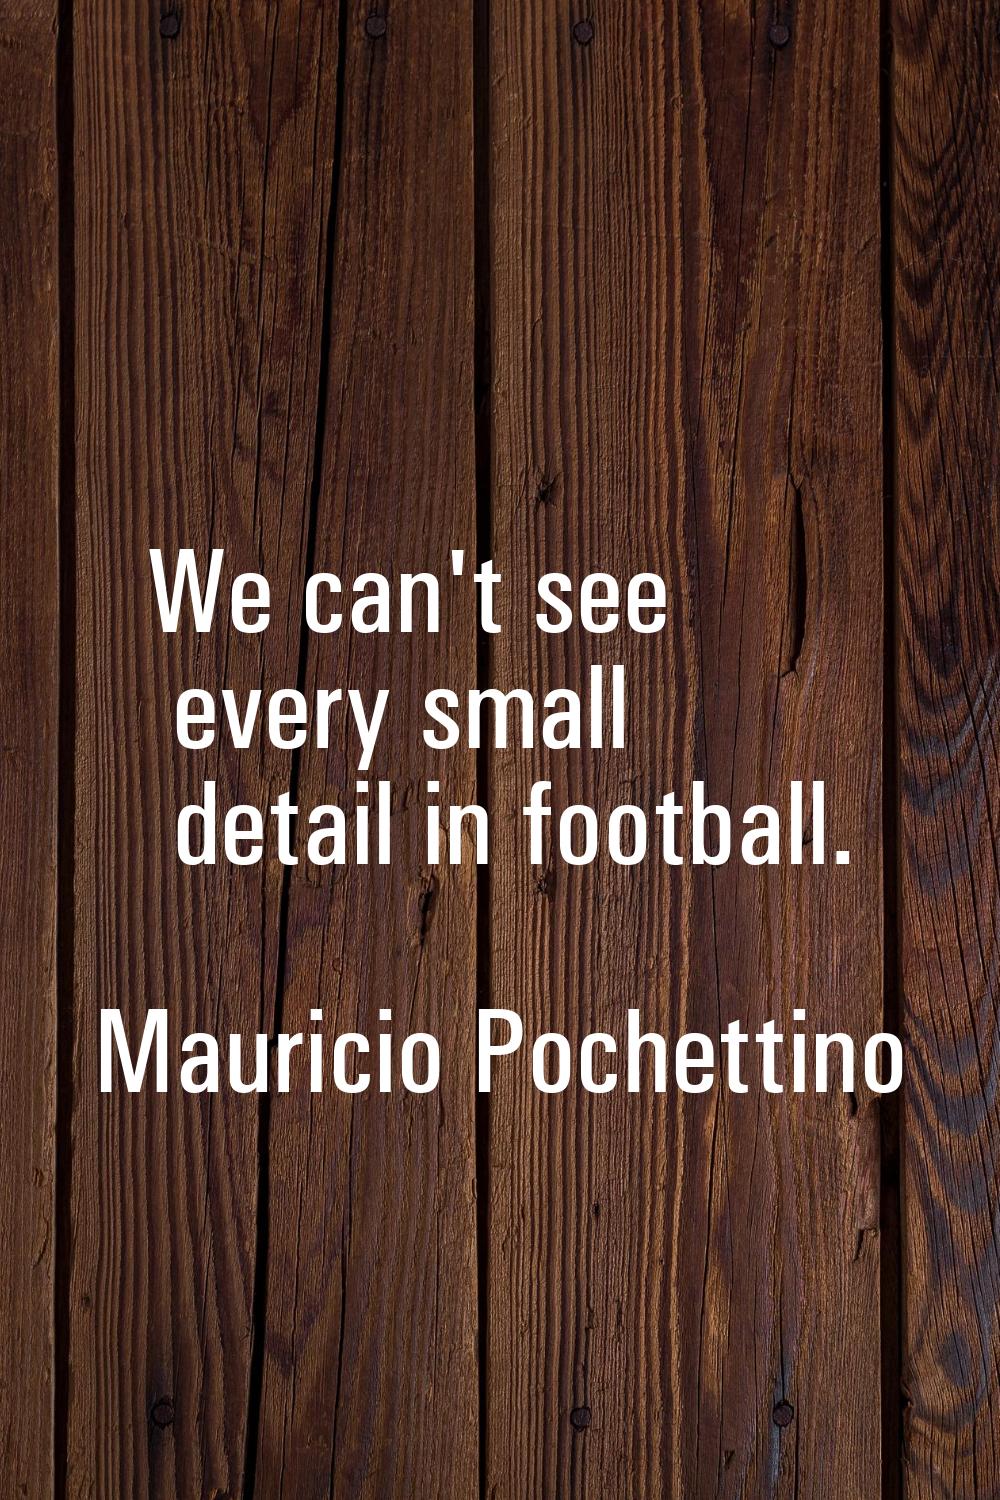 We can't see every small detail in football.